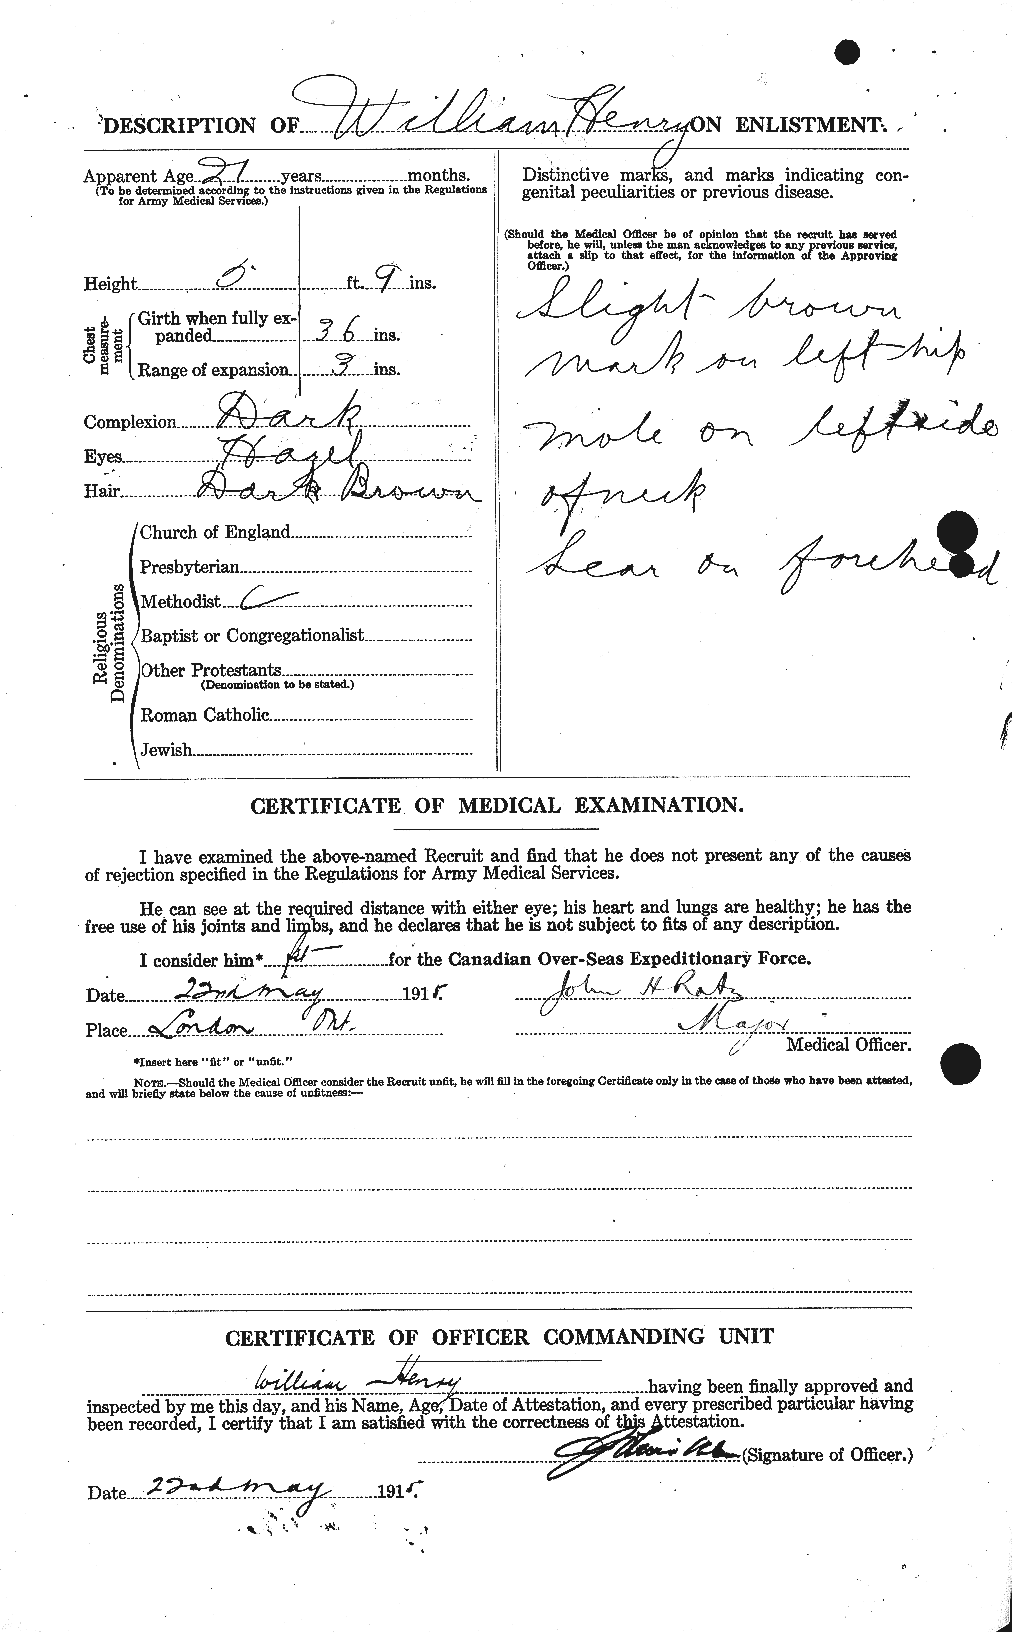 Personnel Records of the First World War - CEF 387768b